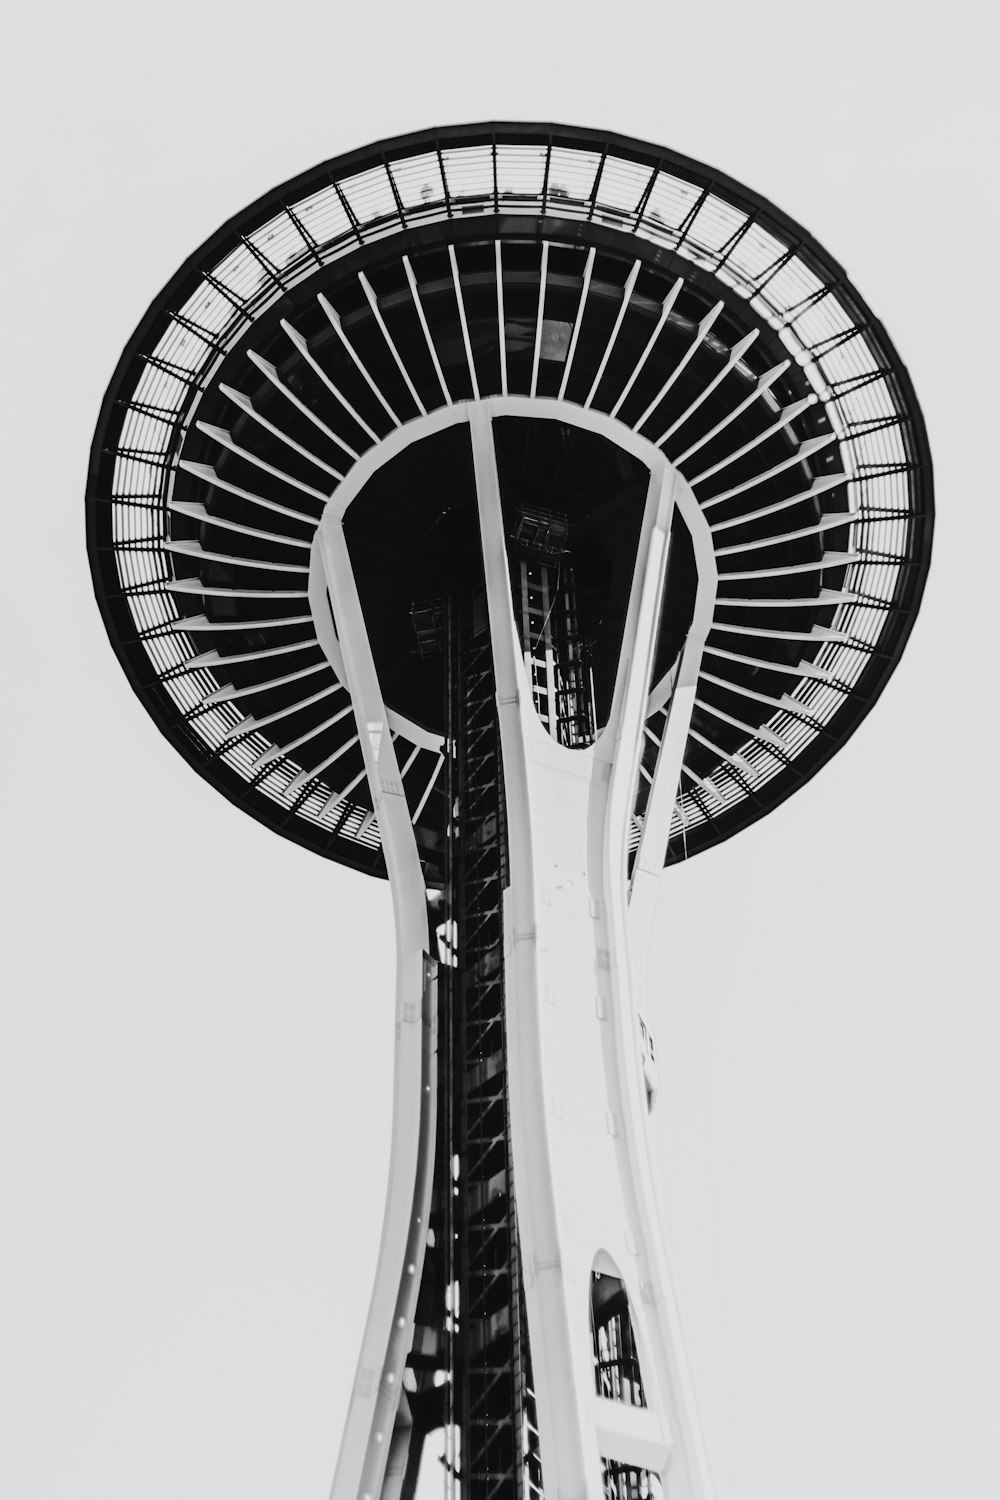 a tall tower with a circular top with Space Needle in the background